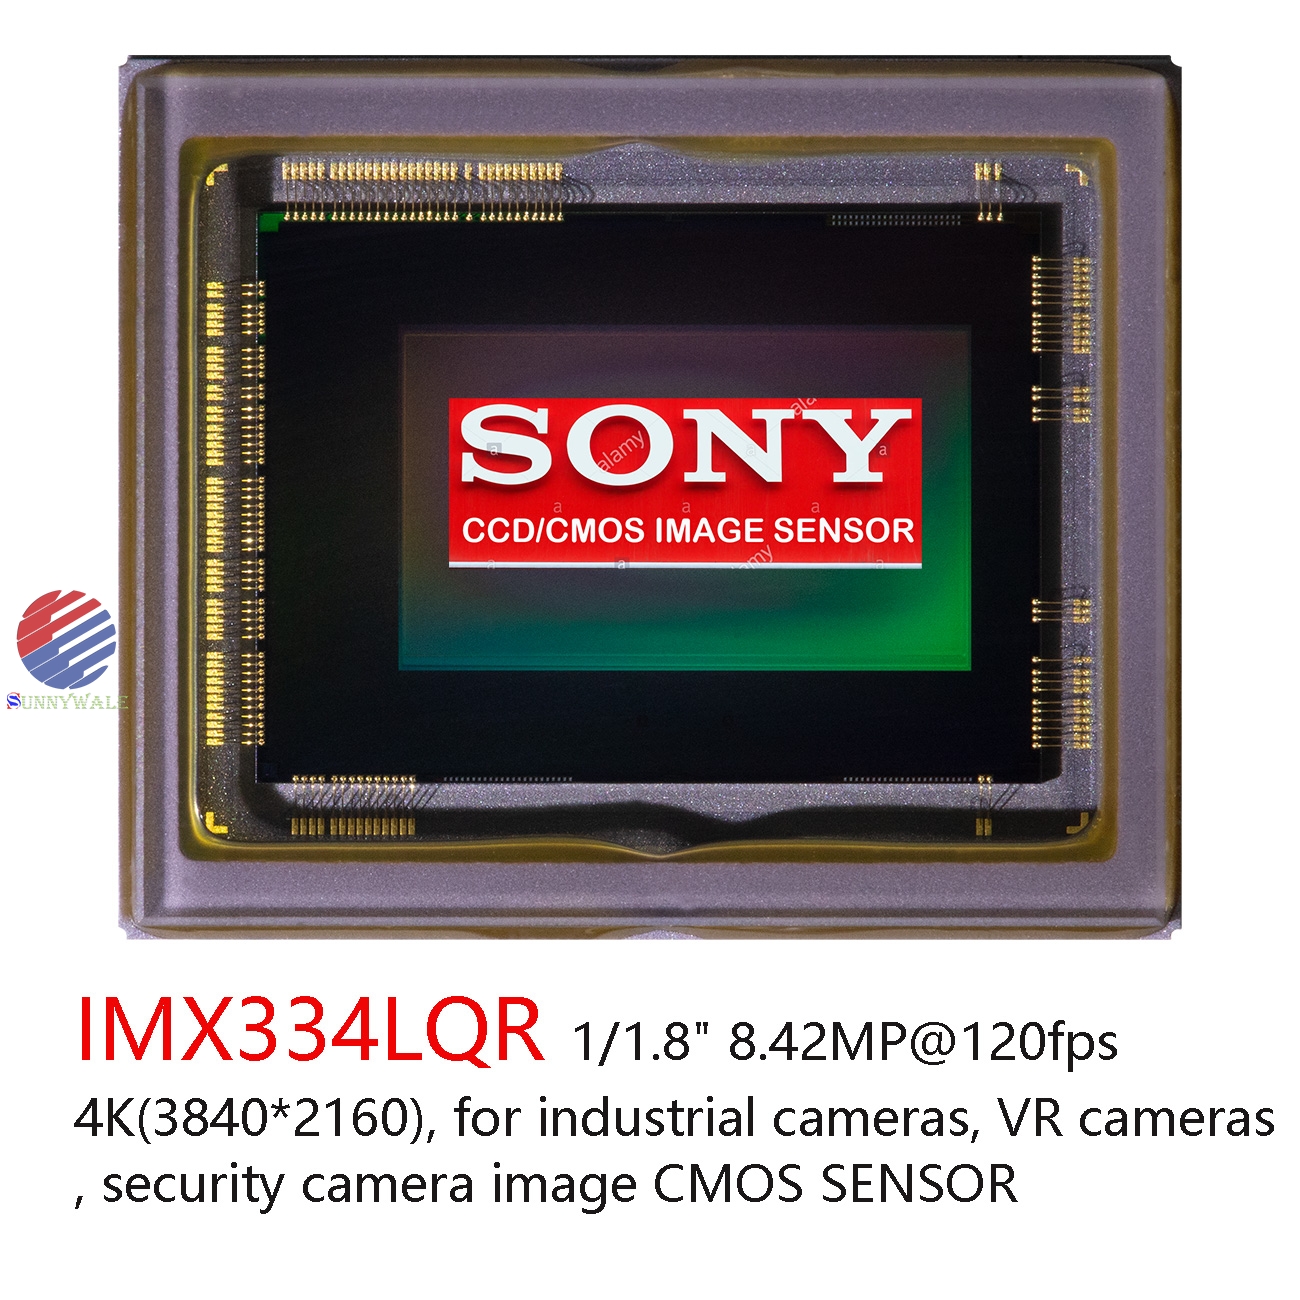 IMX334LQR-C, SONY SONY 1/1.8-inch, 8.42MP 4K(3840X2160P@60-120fps), SONY Image CMOS sensor, Industrial camera, VR camera, high-end security surveillance camera, SONY large target surface sensor chip, SONY high frame rate high pixel large image unit CMOS image sensor